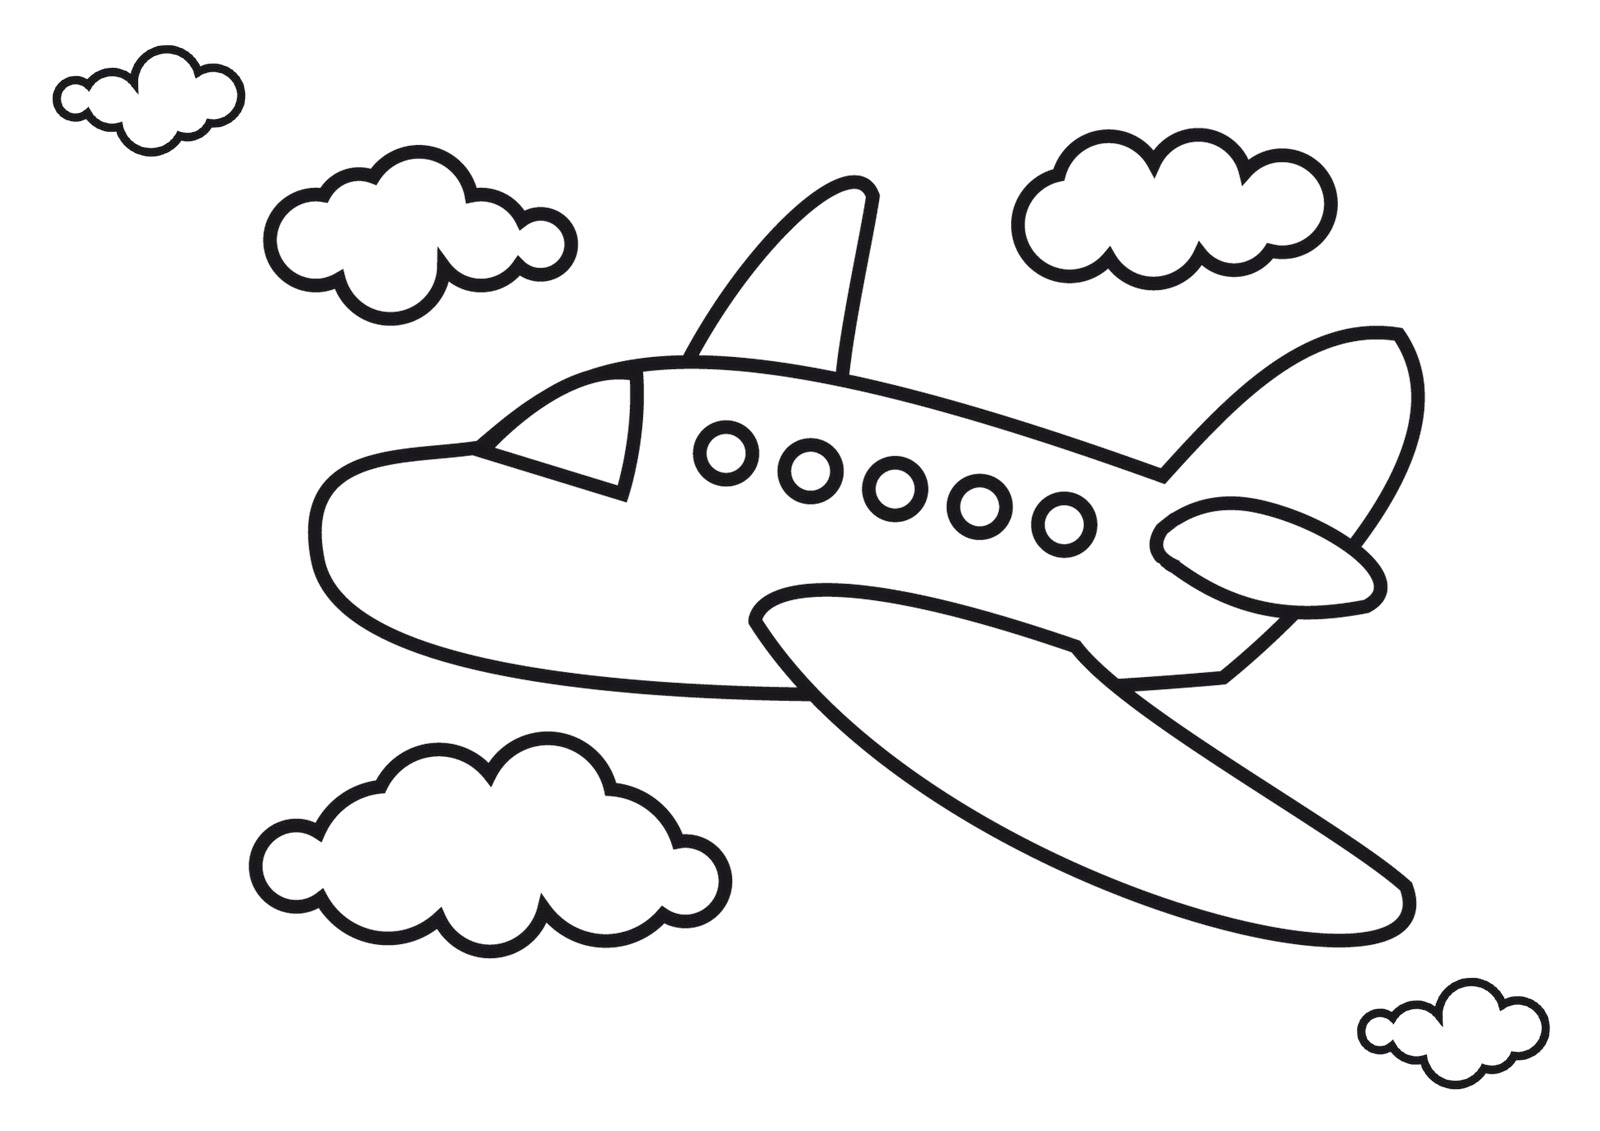 Free Airplane Pictures For Kids, Download Free Airplane Pictures For